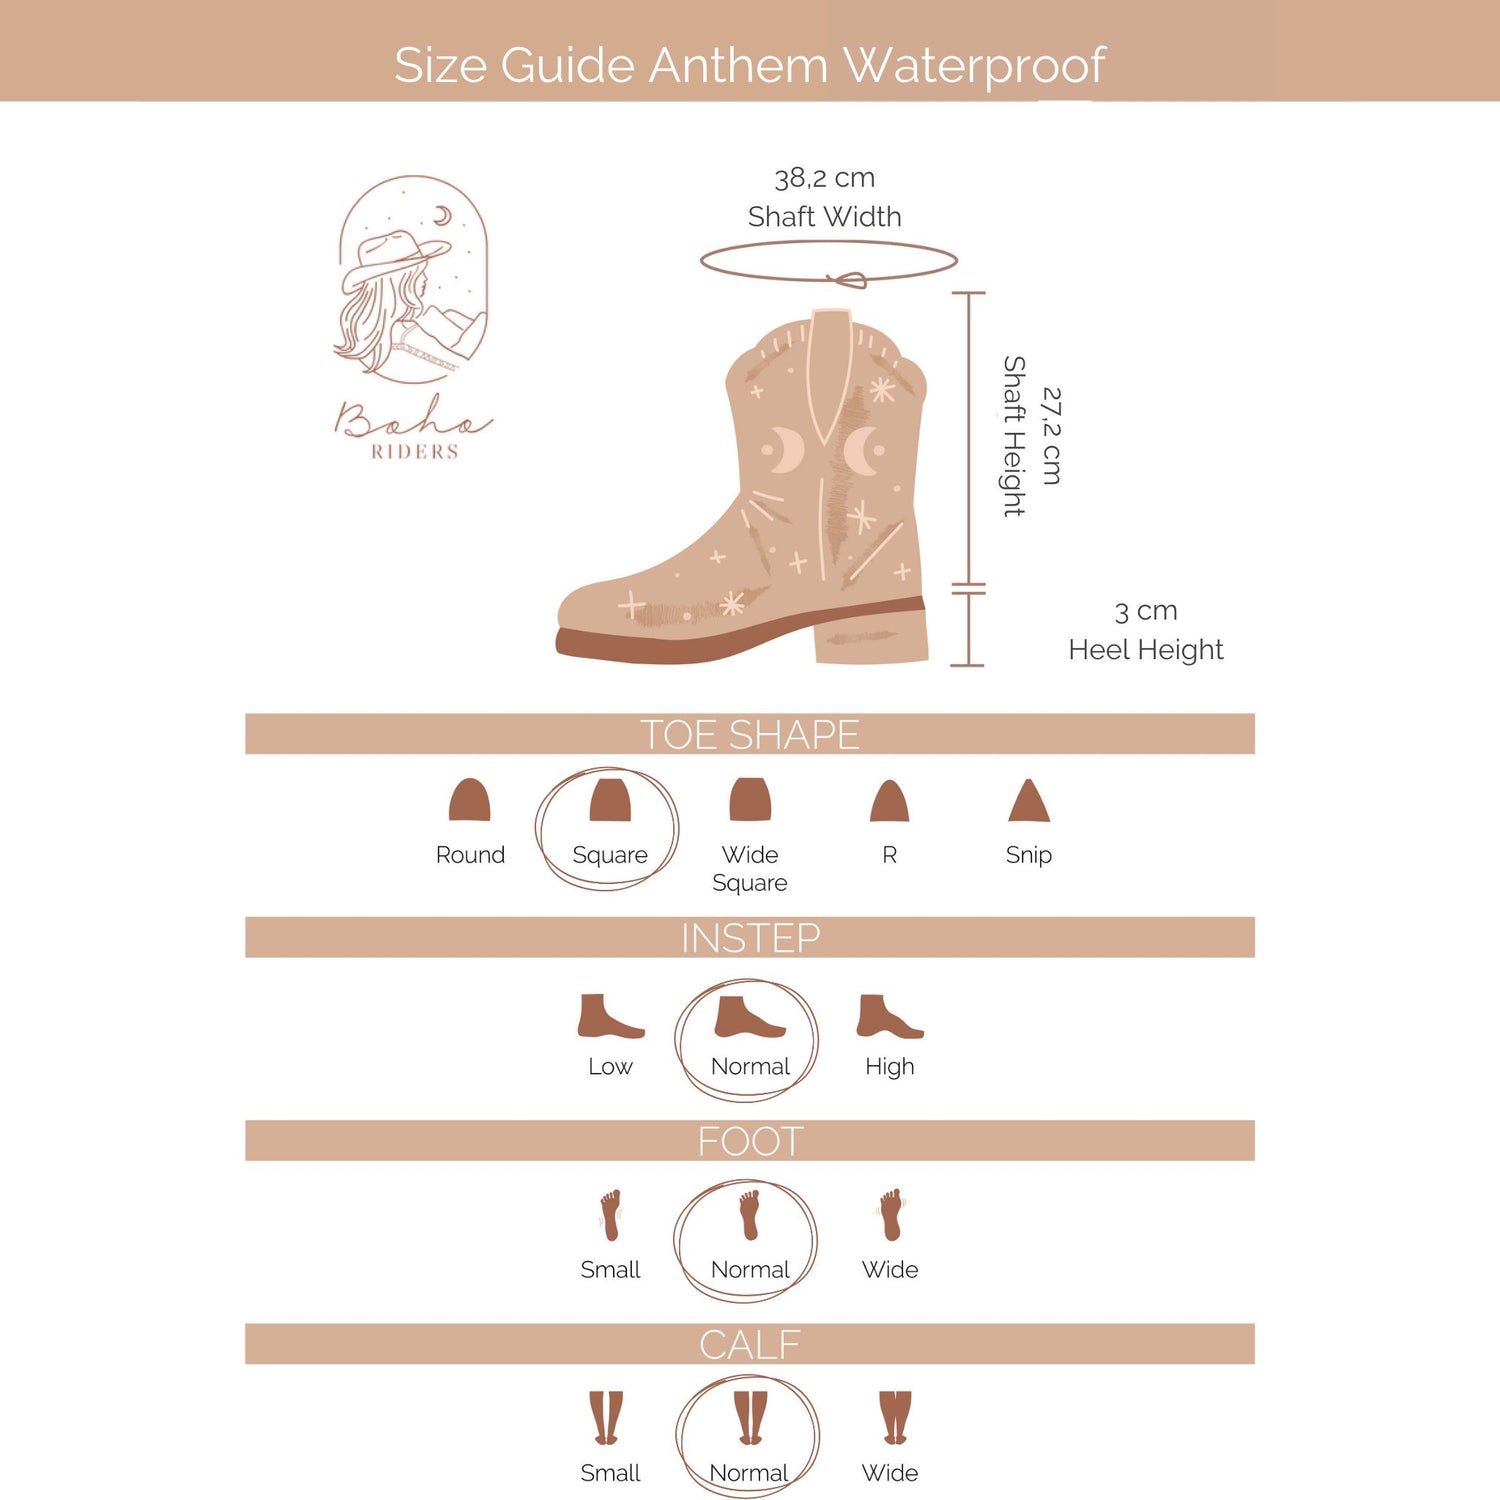 What you want to know about the fit ofAriat Anthem Waterproof Western Boot - Riding Boots - Distressed Brown - Waterproof 